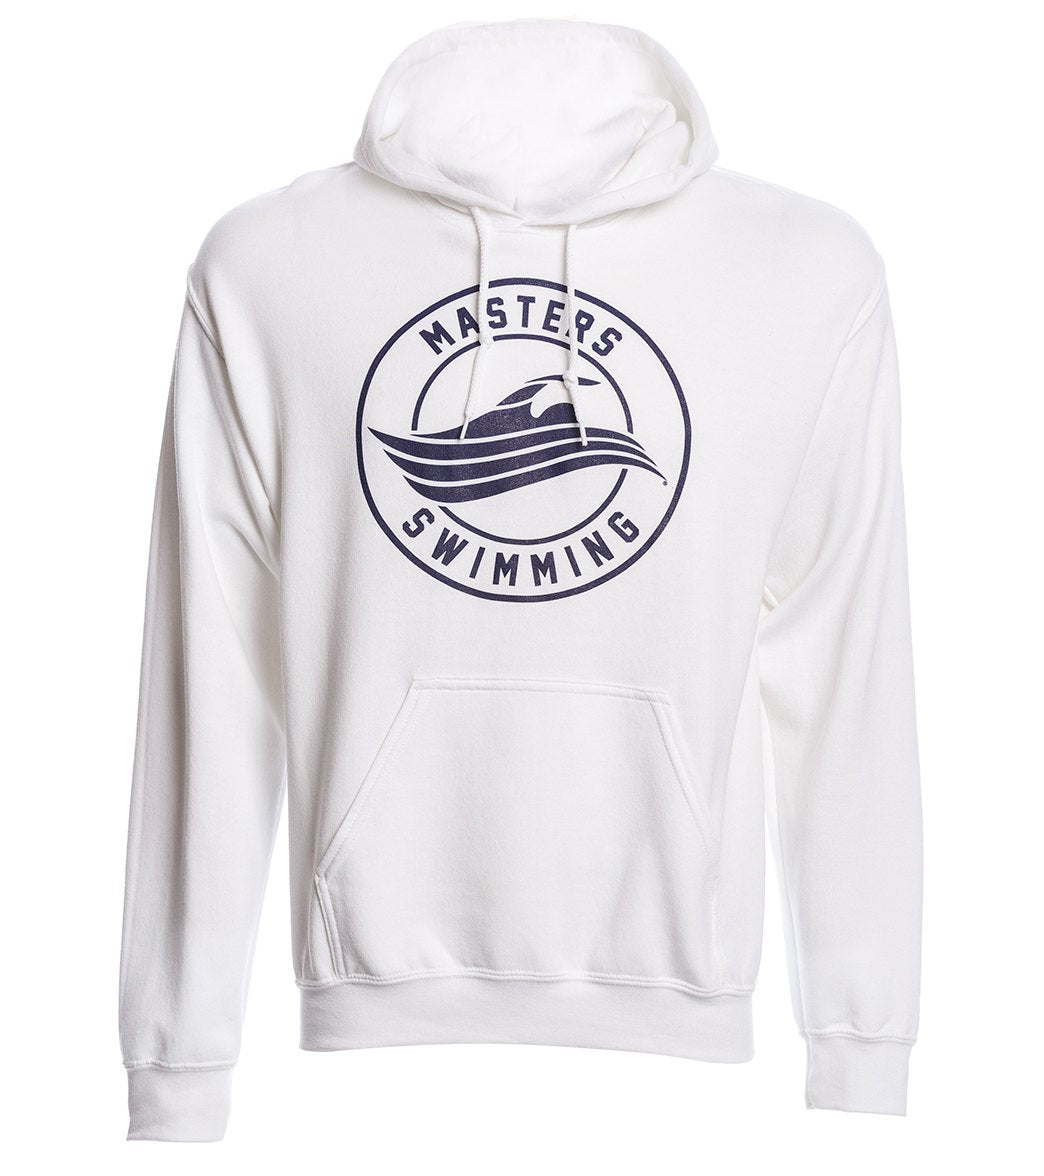 U.s. Masters Swimming Usms Men's Masters Stamp Hooded Sweatshirt - White Xl Cotton/Cotton/Polyester/Polyester - Swimoutlet.com